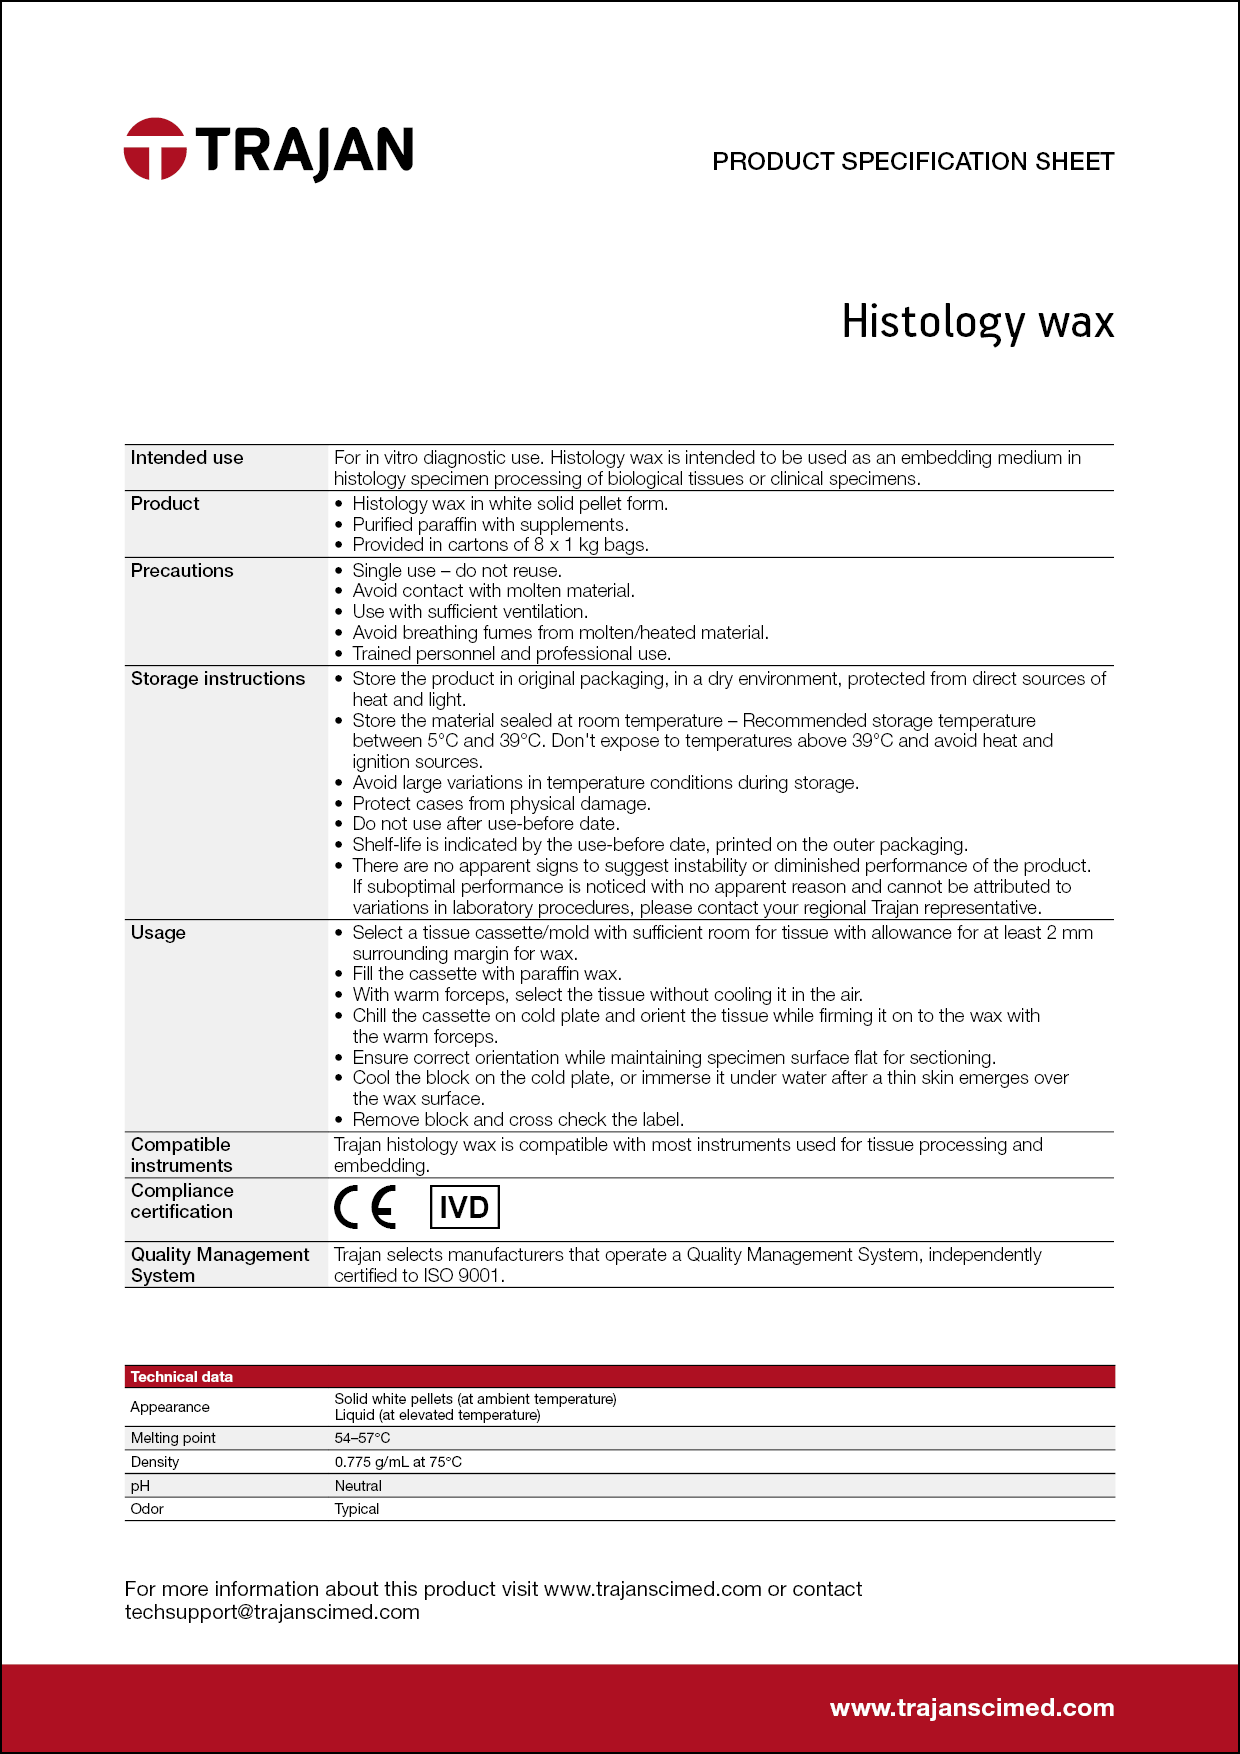 Product Specification Sheet - Histology wax